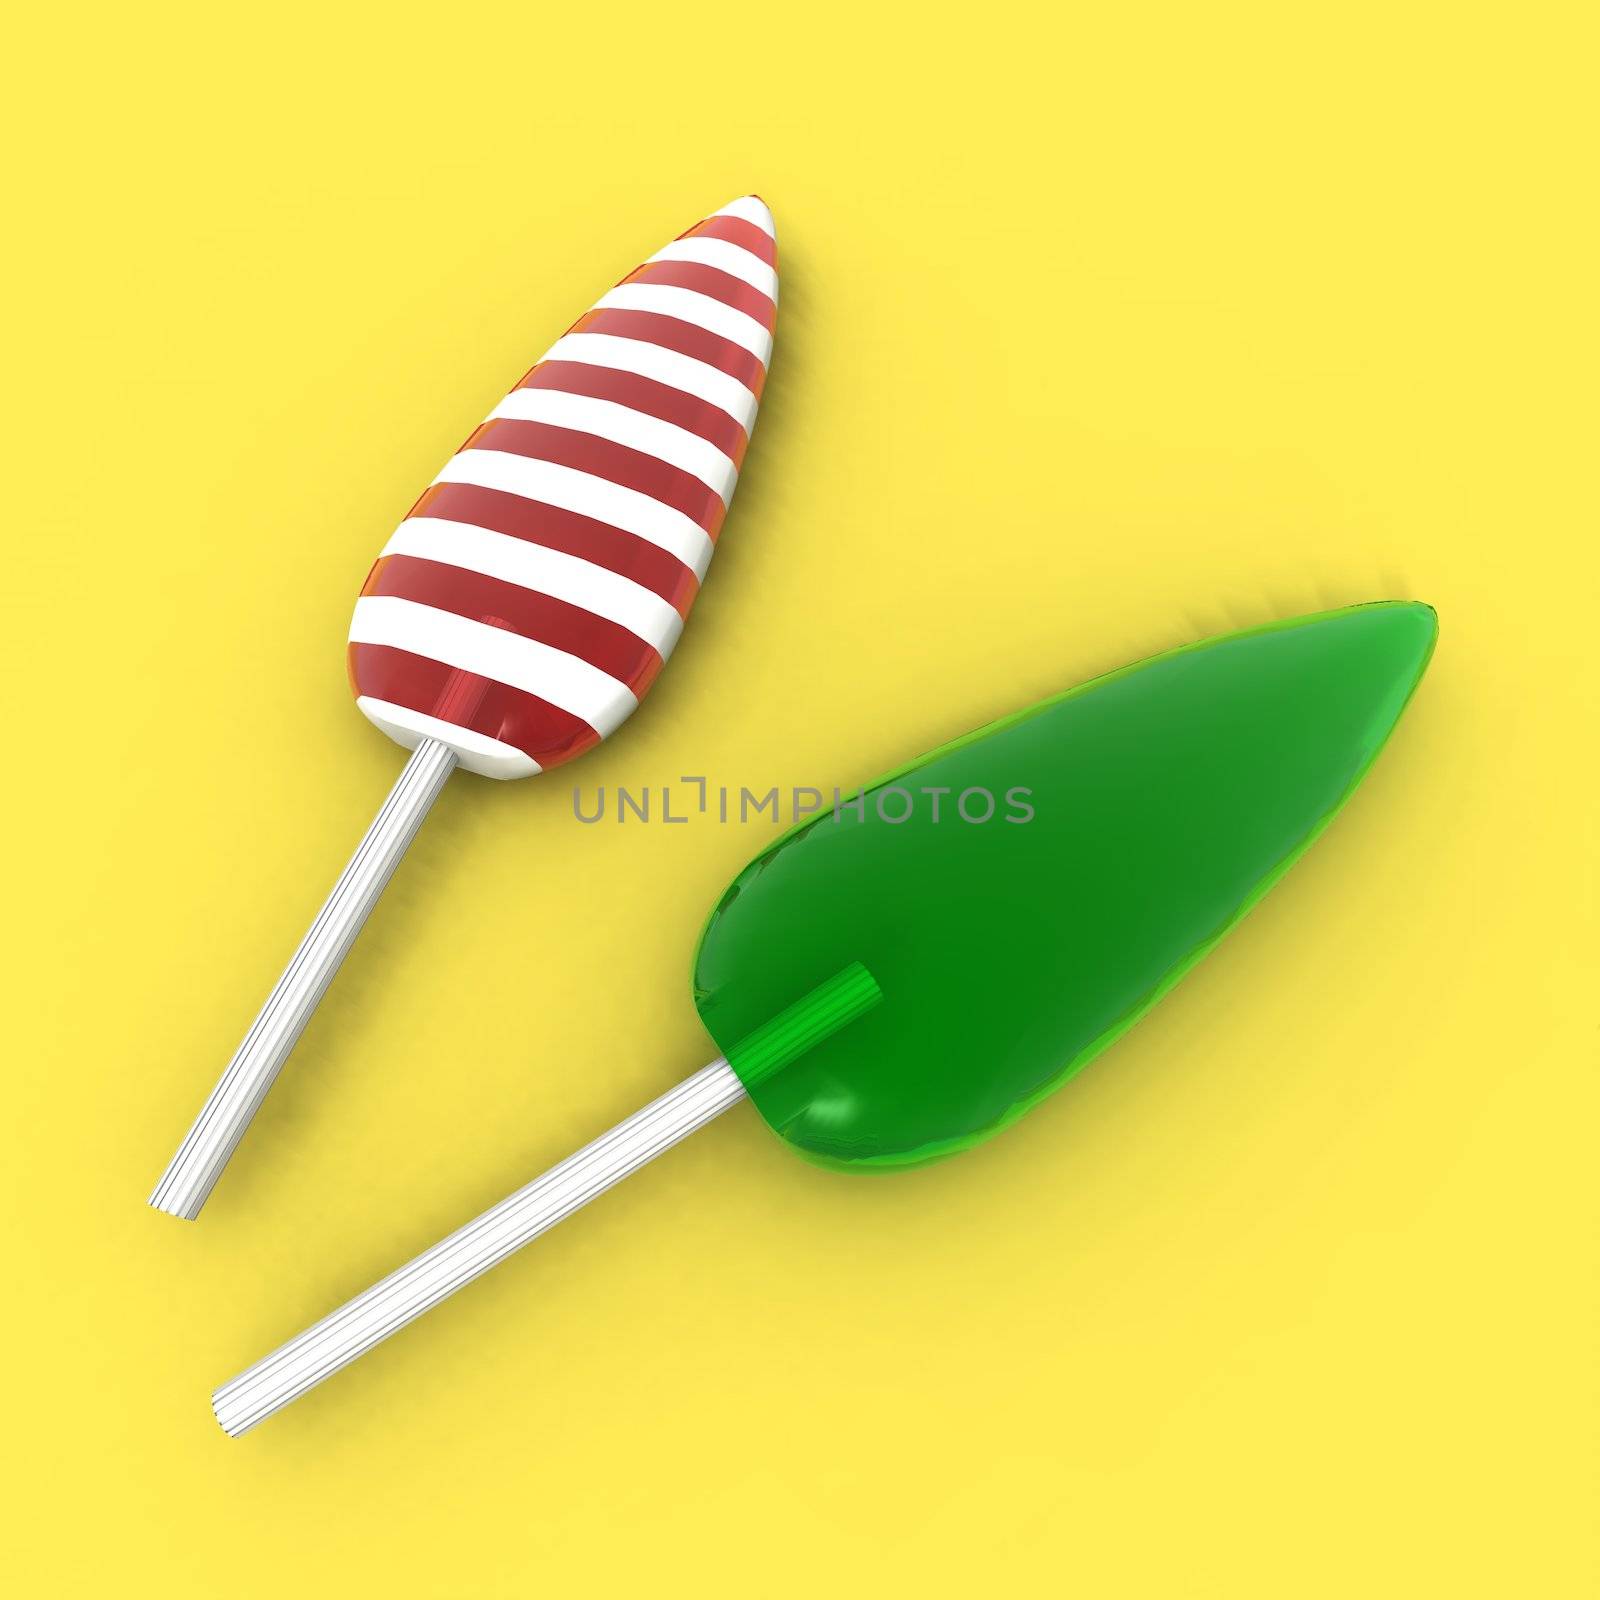 a 3d render of some colored lollipops